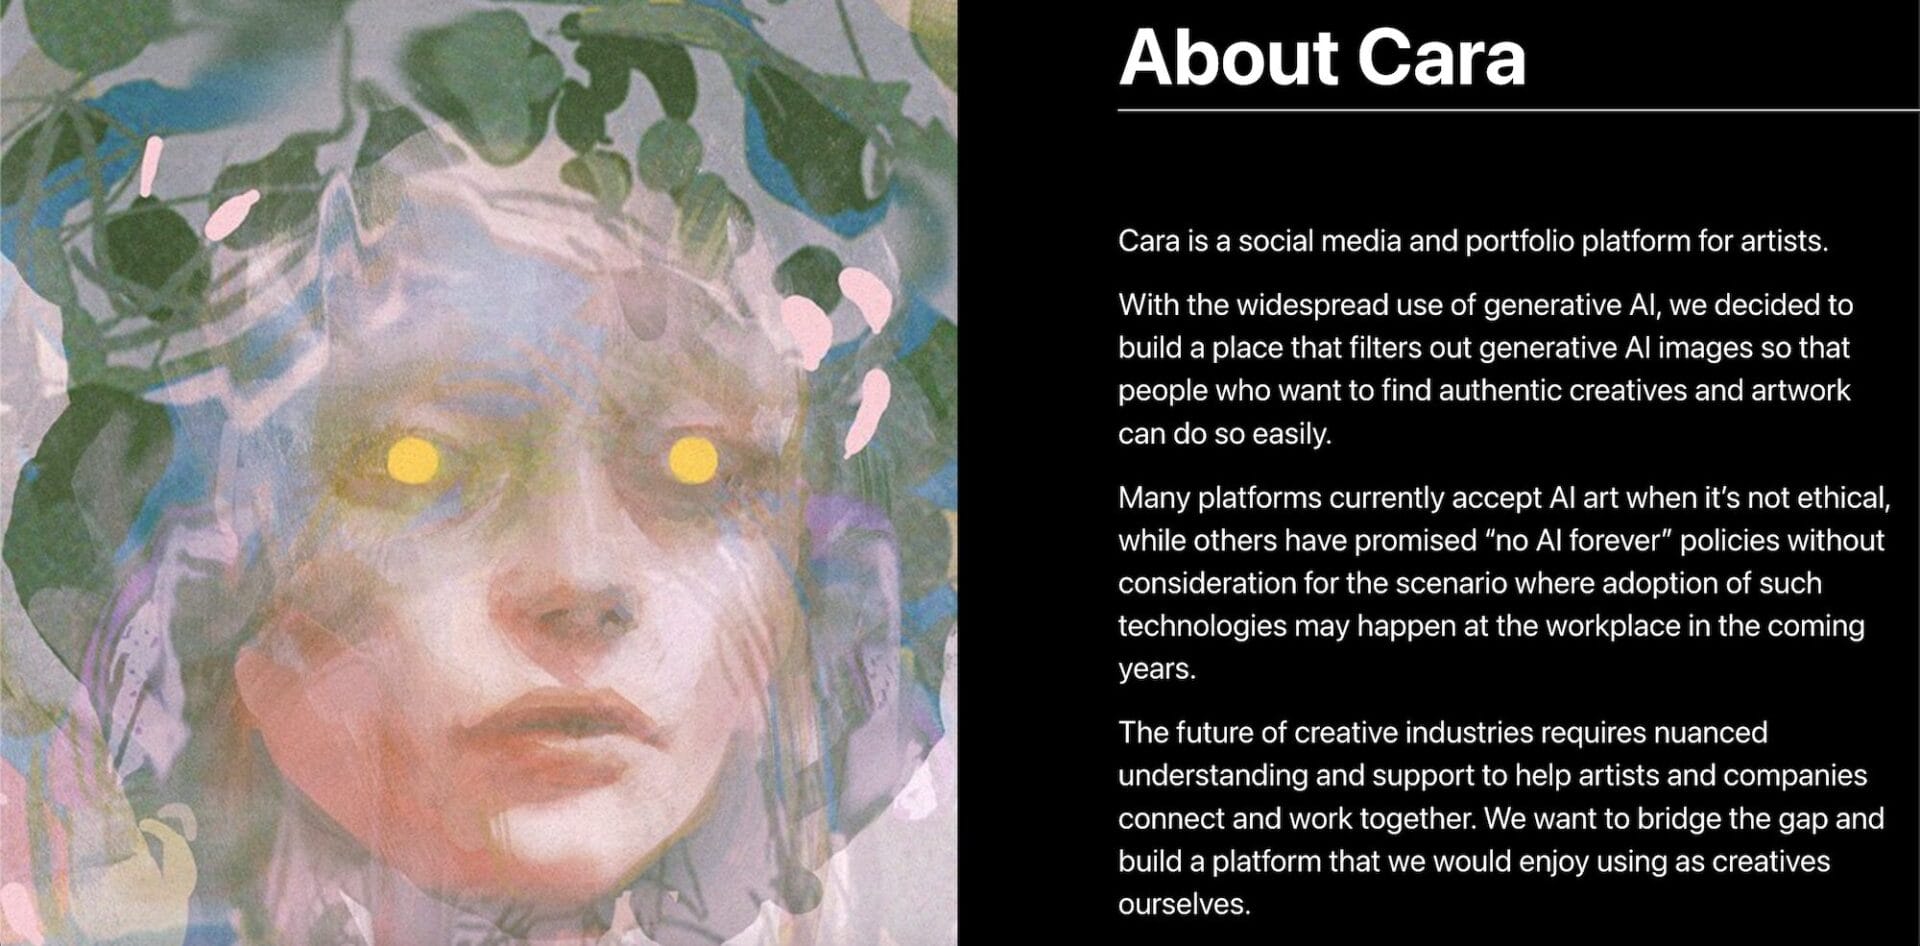 a screenshot from the Cara app website showing an illustration by Tobias Kwan and some text headed "About Cara" with information about the social media platform and portfolio